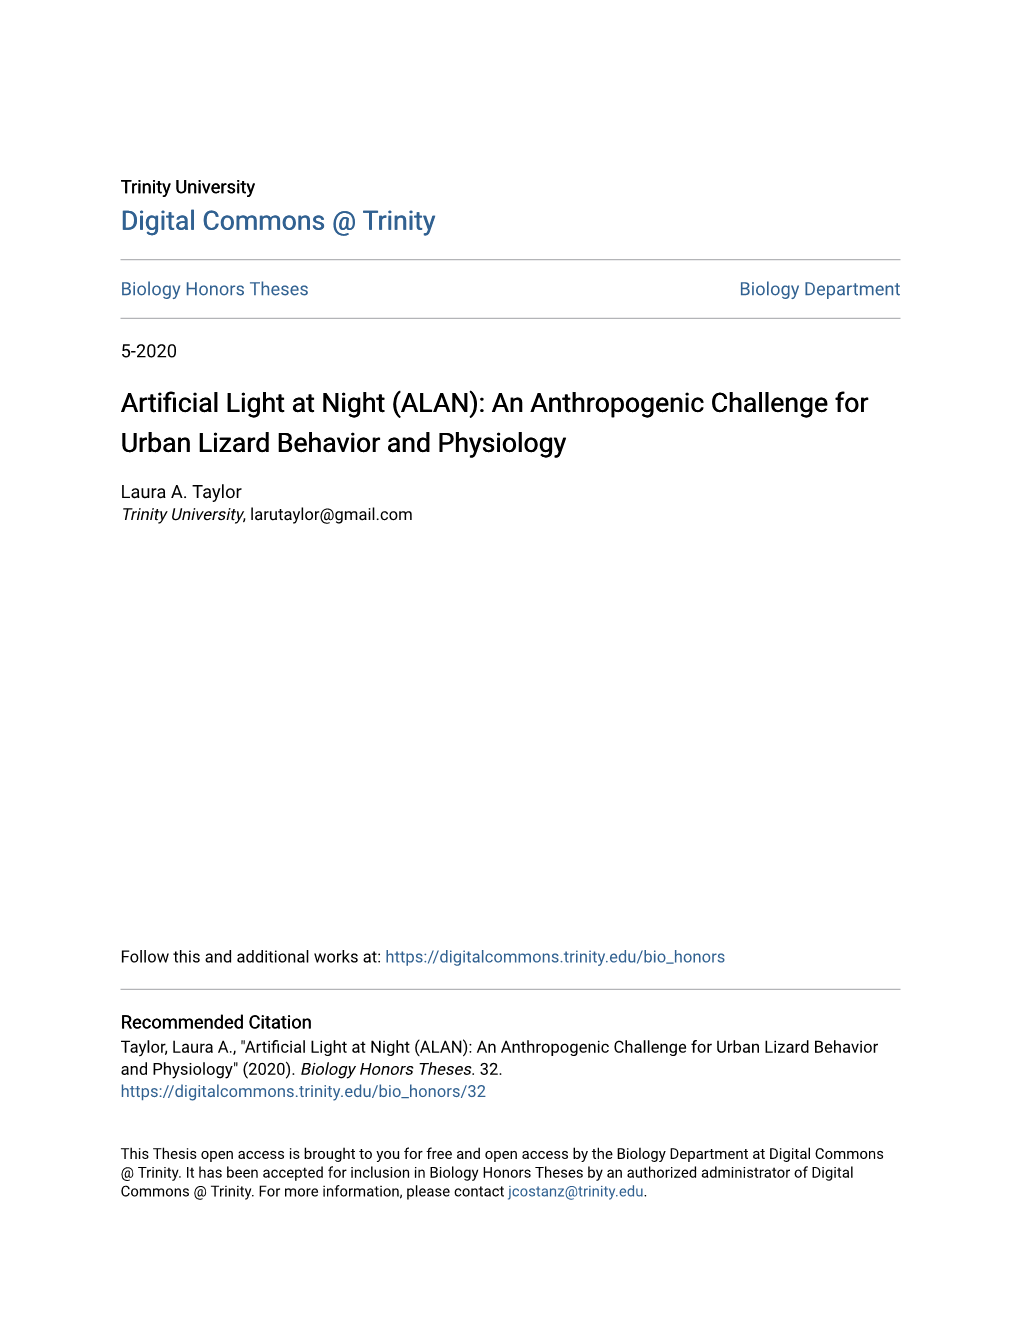 Artificial Light at Night (ALAN): an Anthropogenic Challenge for Urban Lizard Behavior and Physiology